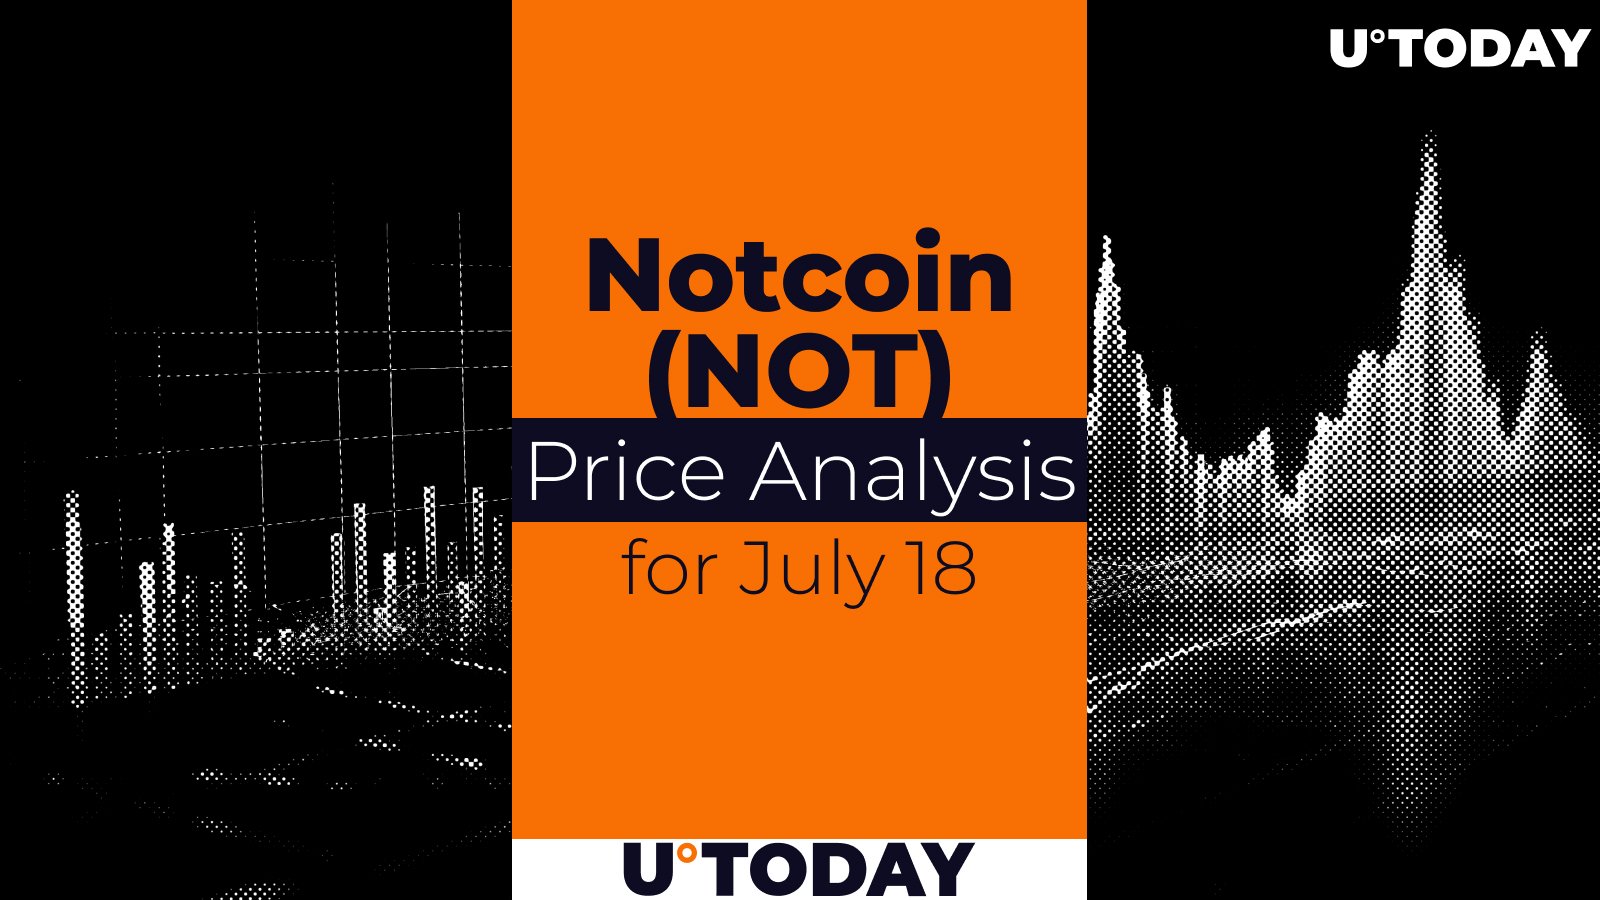 Notcoin (NOT) Price Prediction for July 18